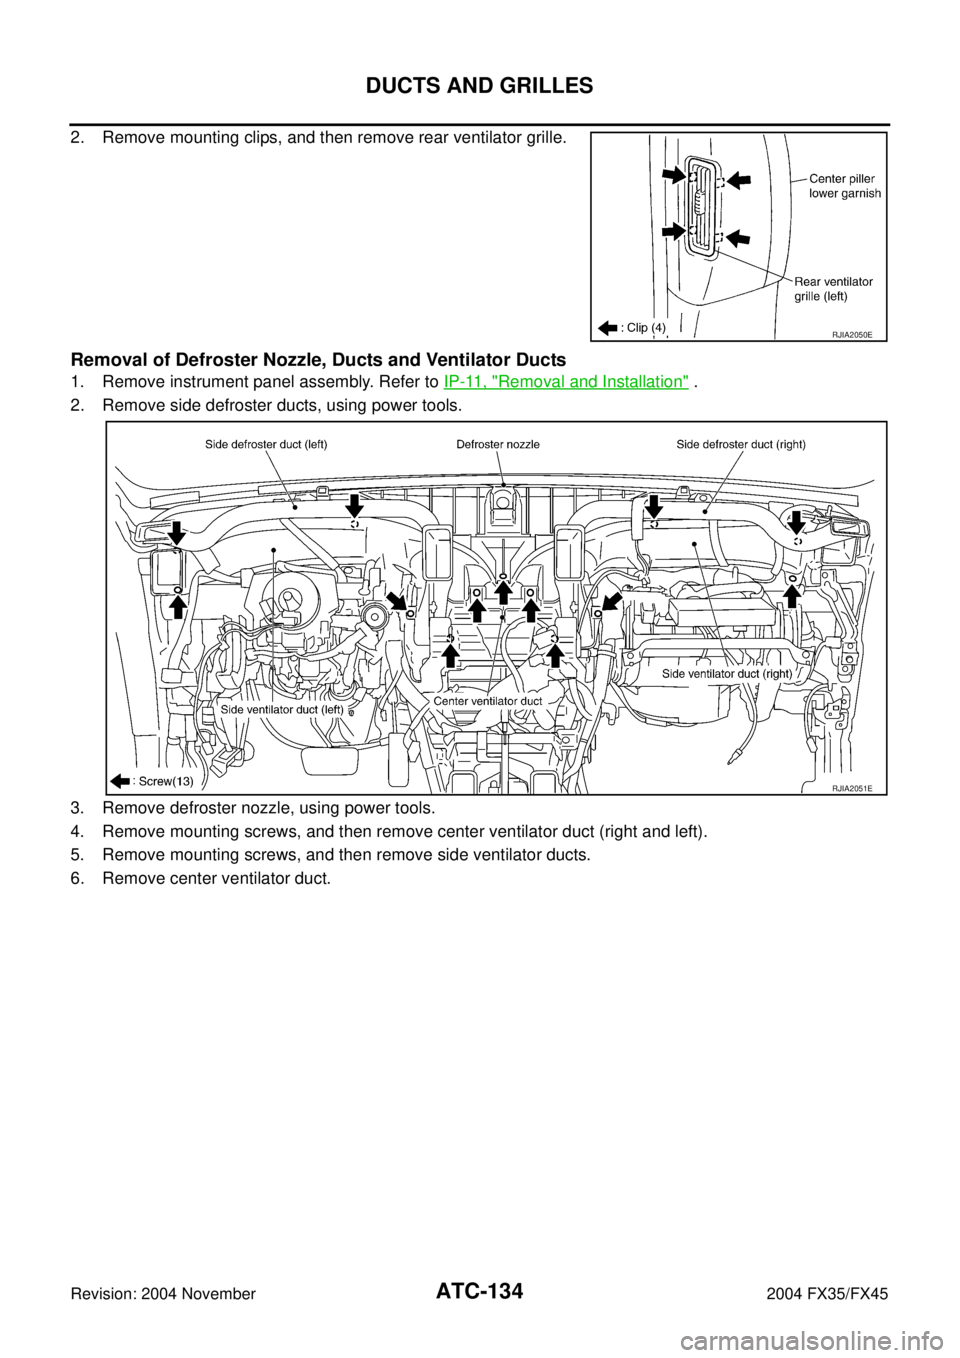 INFINITI FX35 2004  Service Manual ATC-134
DUCTS AND GRILLES
Revision: 2004 November 2004 FX35/FX45
2. Remove mounting clips, and then remove rear ventilator grille.
Removal of Defroster Nozzle, Ducts and Ventilator Ducts
1. Remove ins